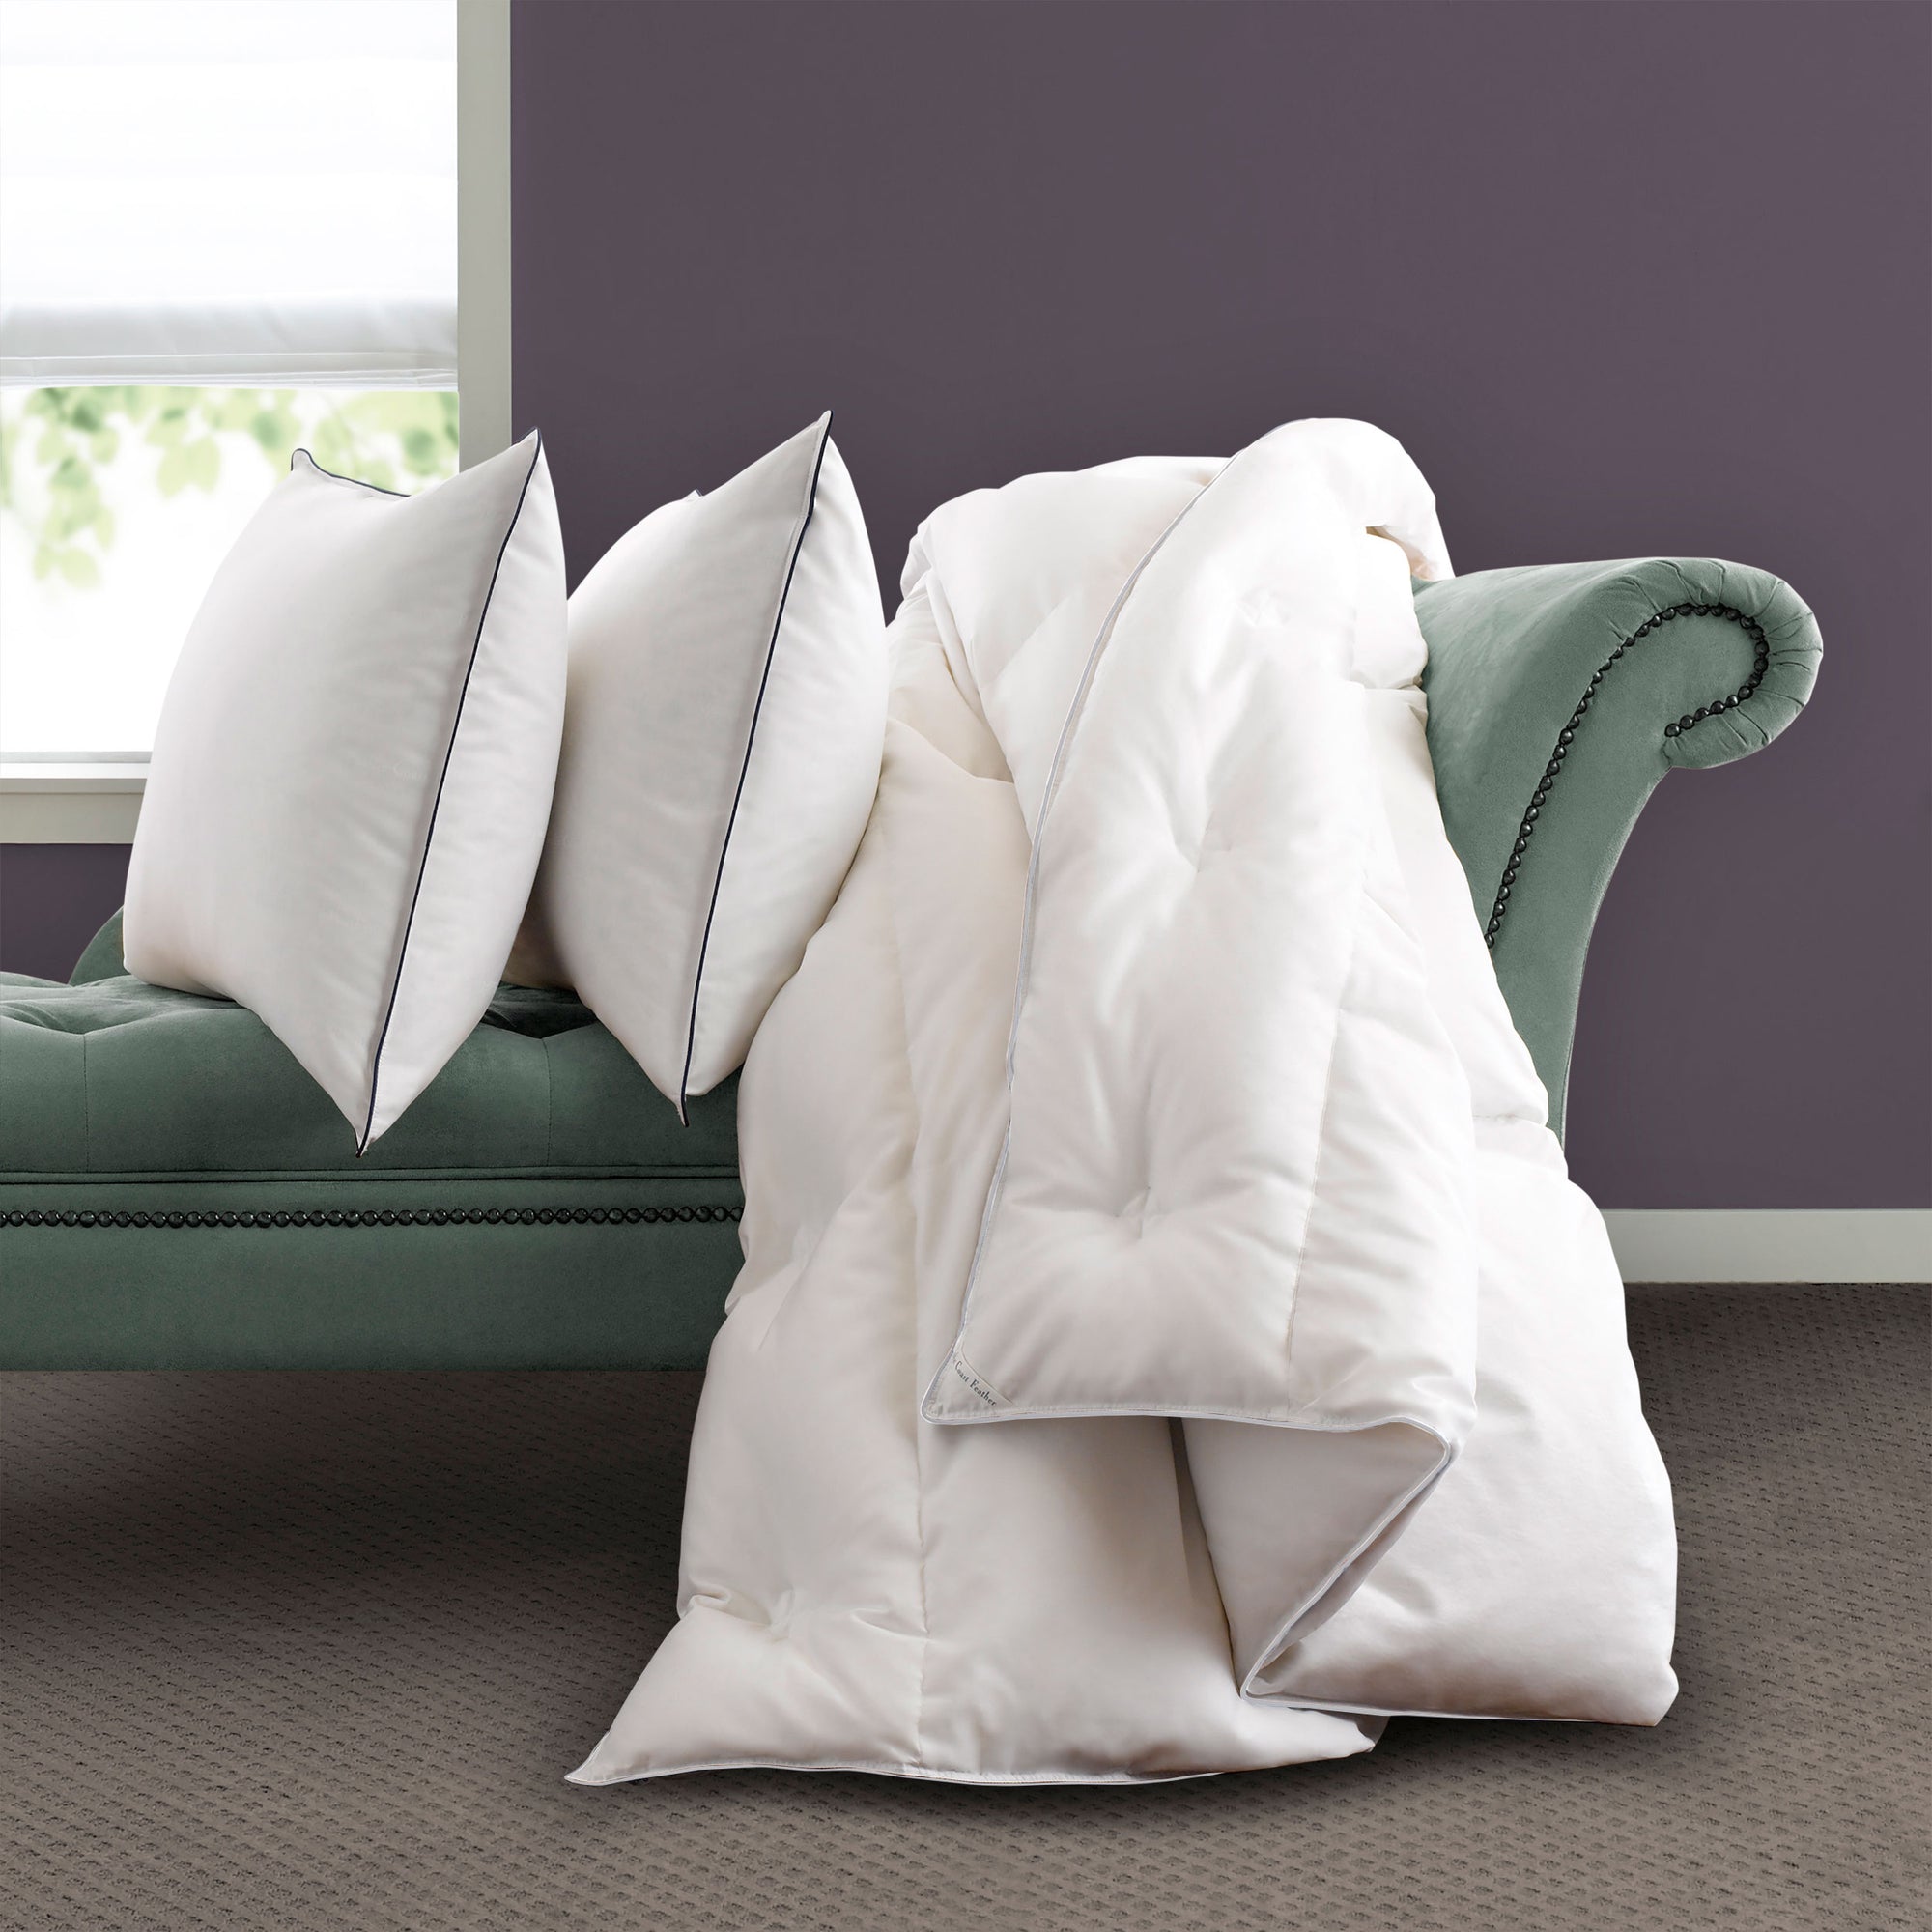 5 Simple Facts About down pillows Explained